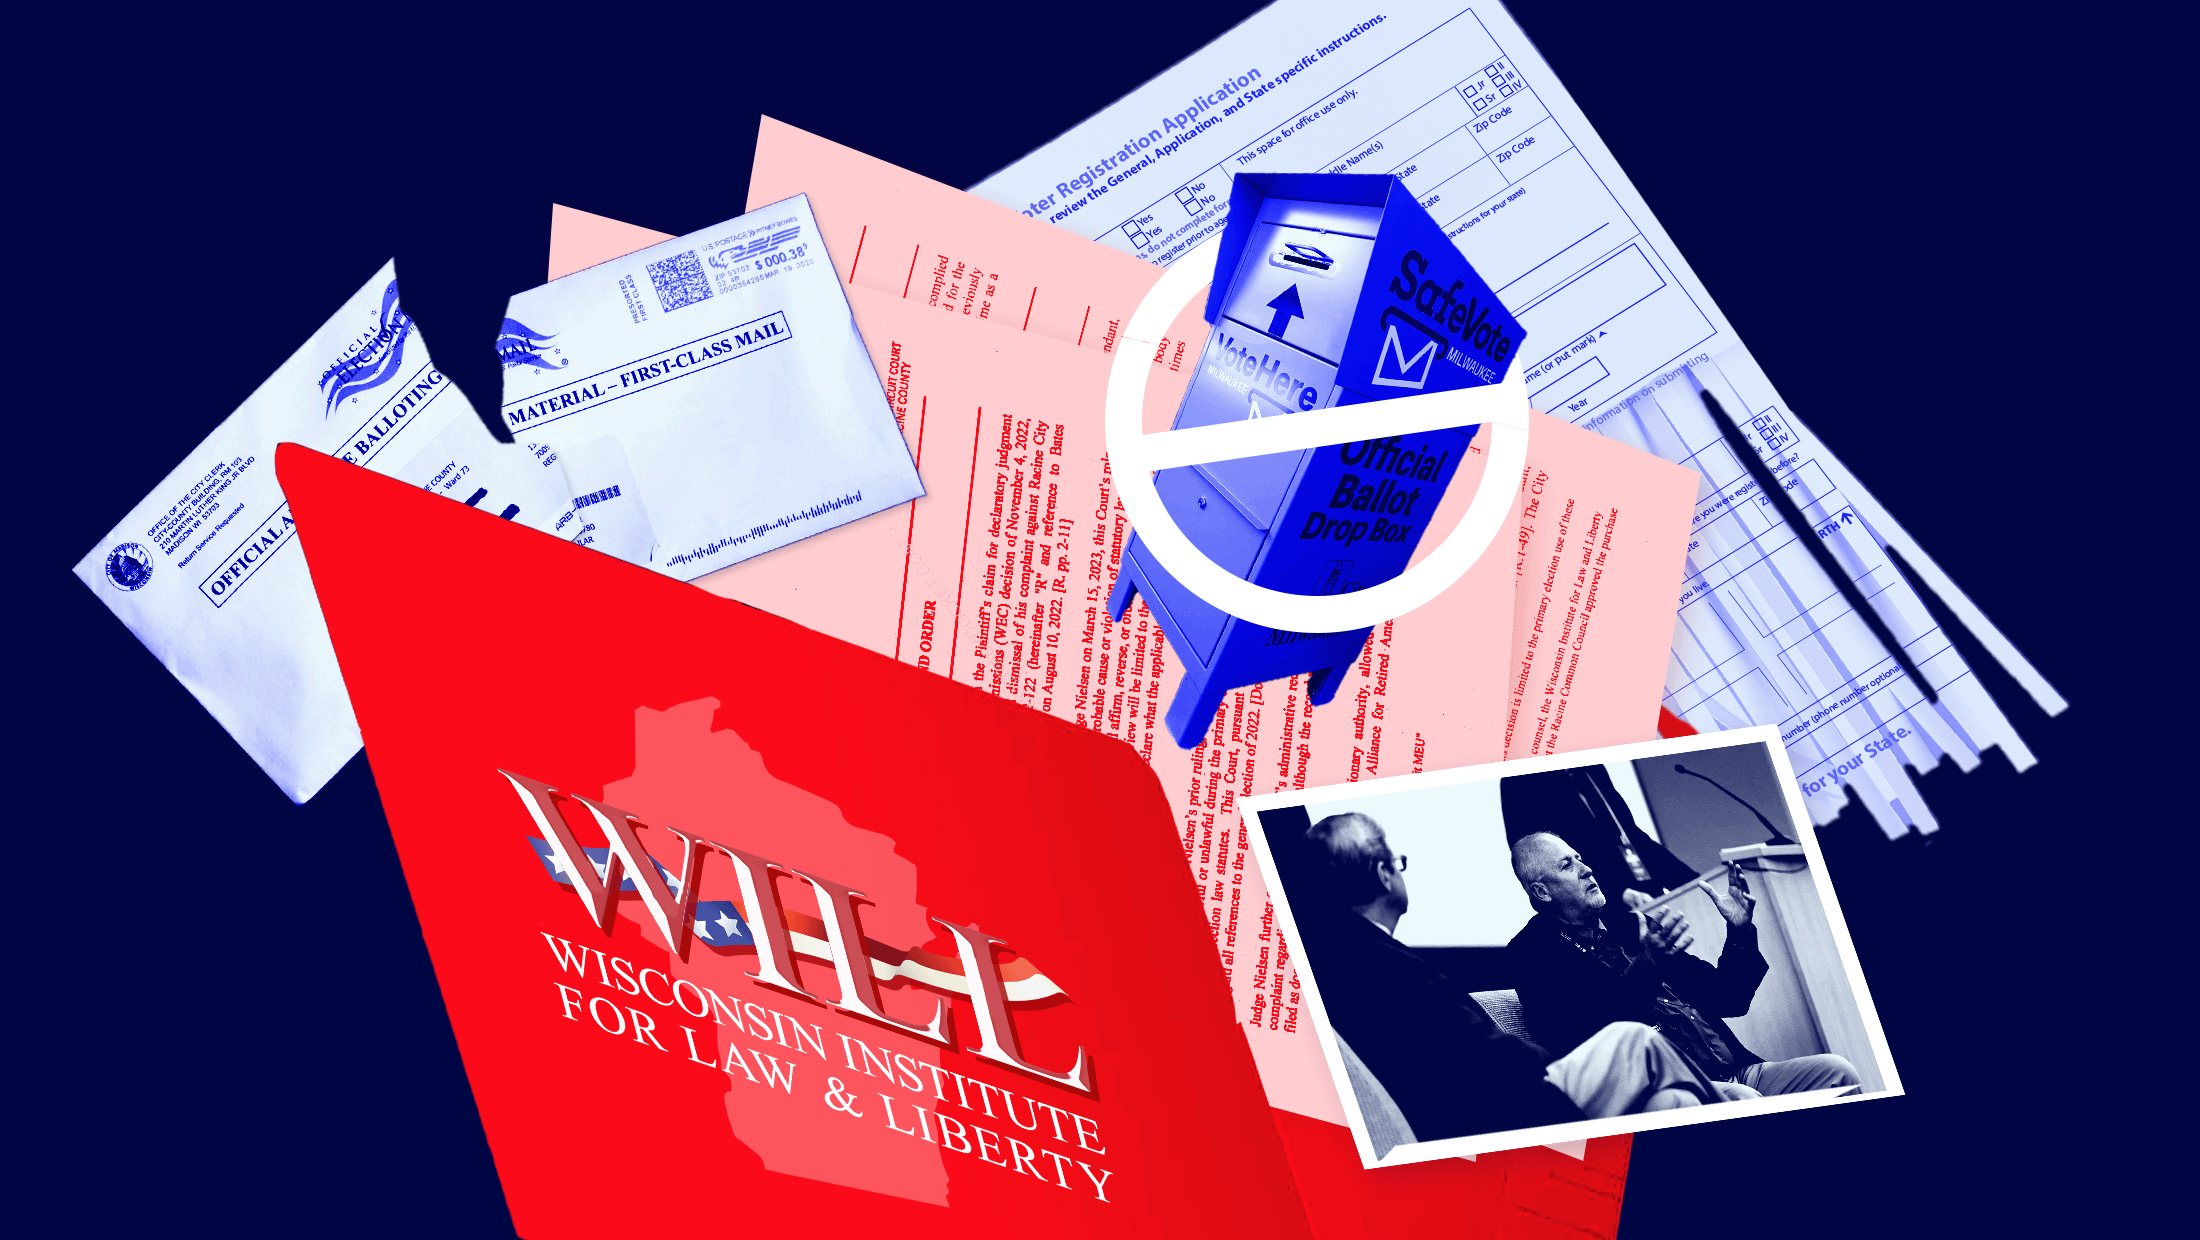 A collage of items in front of a dark blue background that include: A ripped mail-in ballot envelope, a blue postal box with that is crossed out, WILL's logo, a voter registration application and Rick Esenberg talking